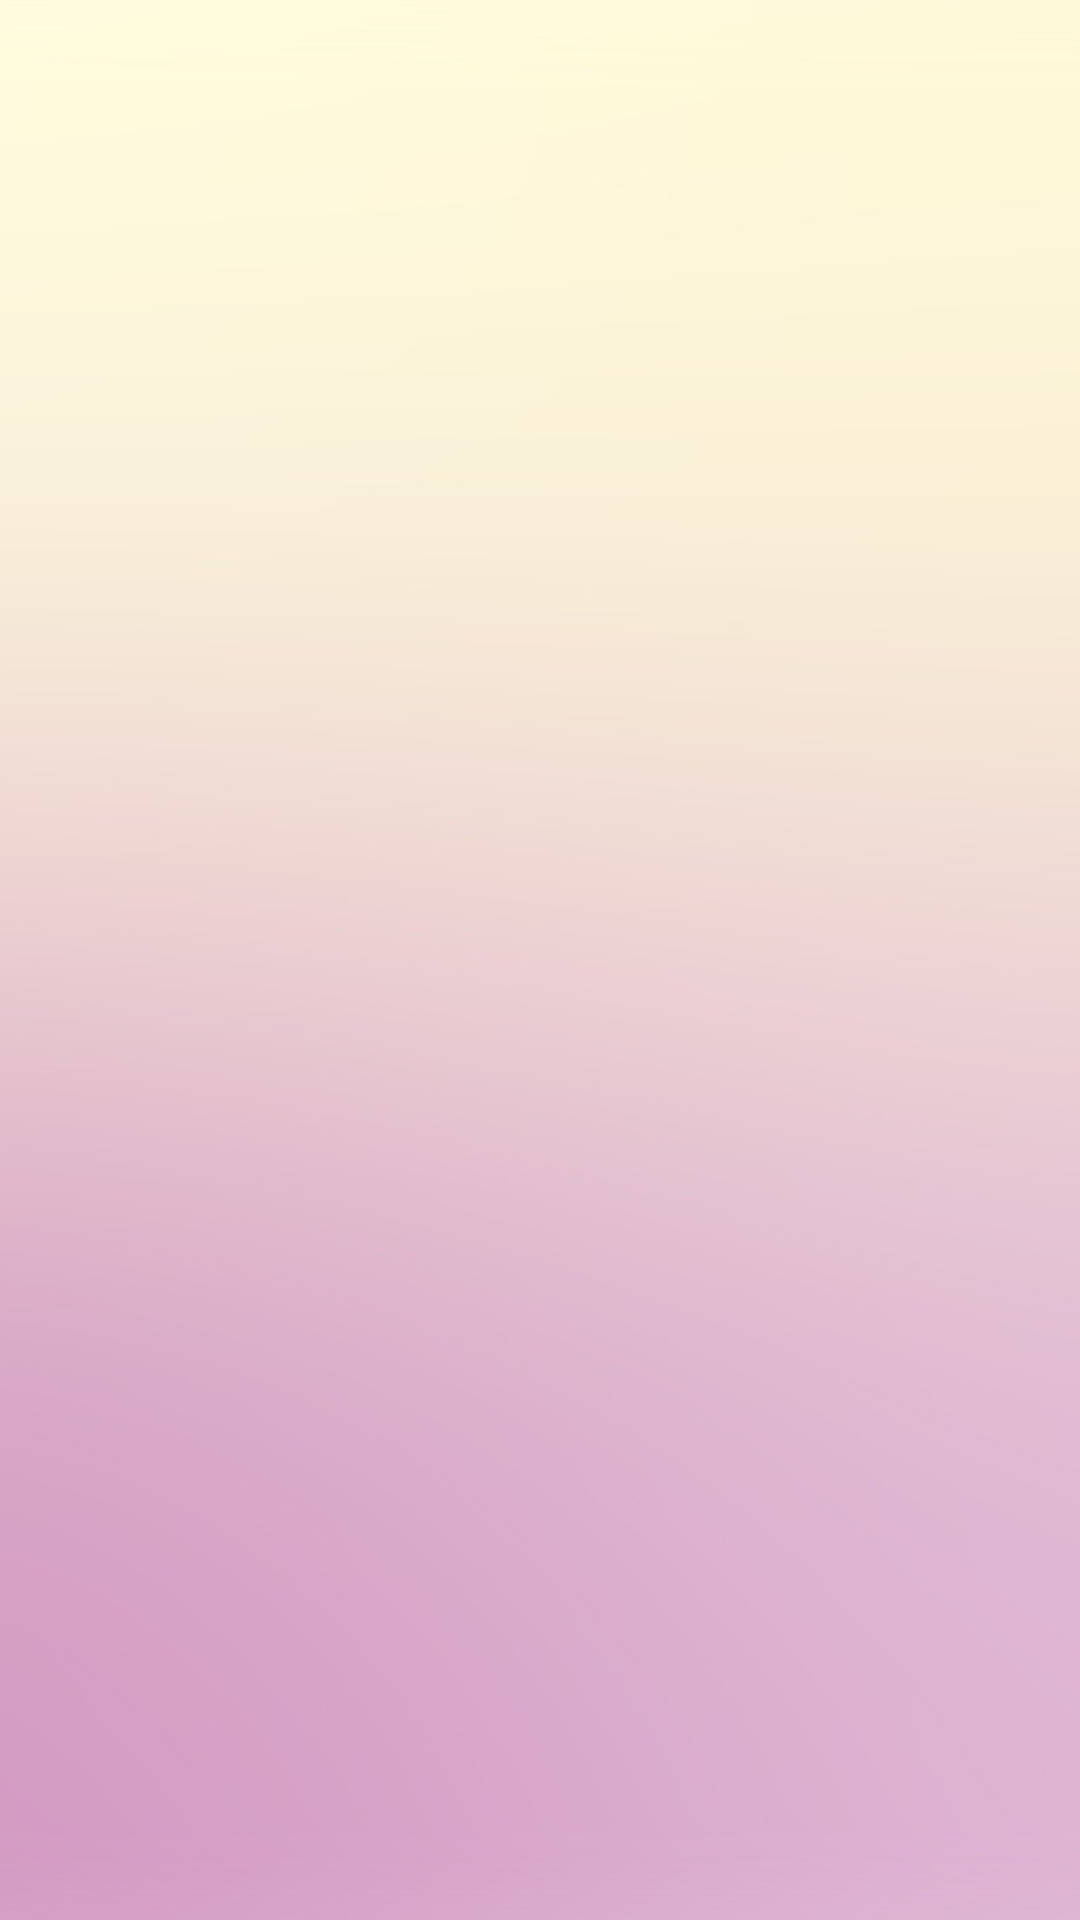 Using the New Pastel Pink iPhone Wallpaper